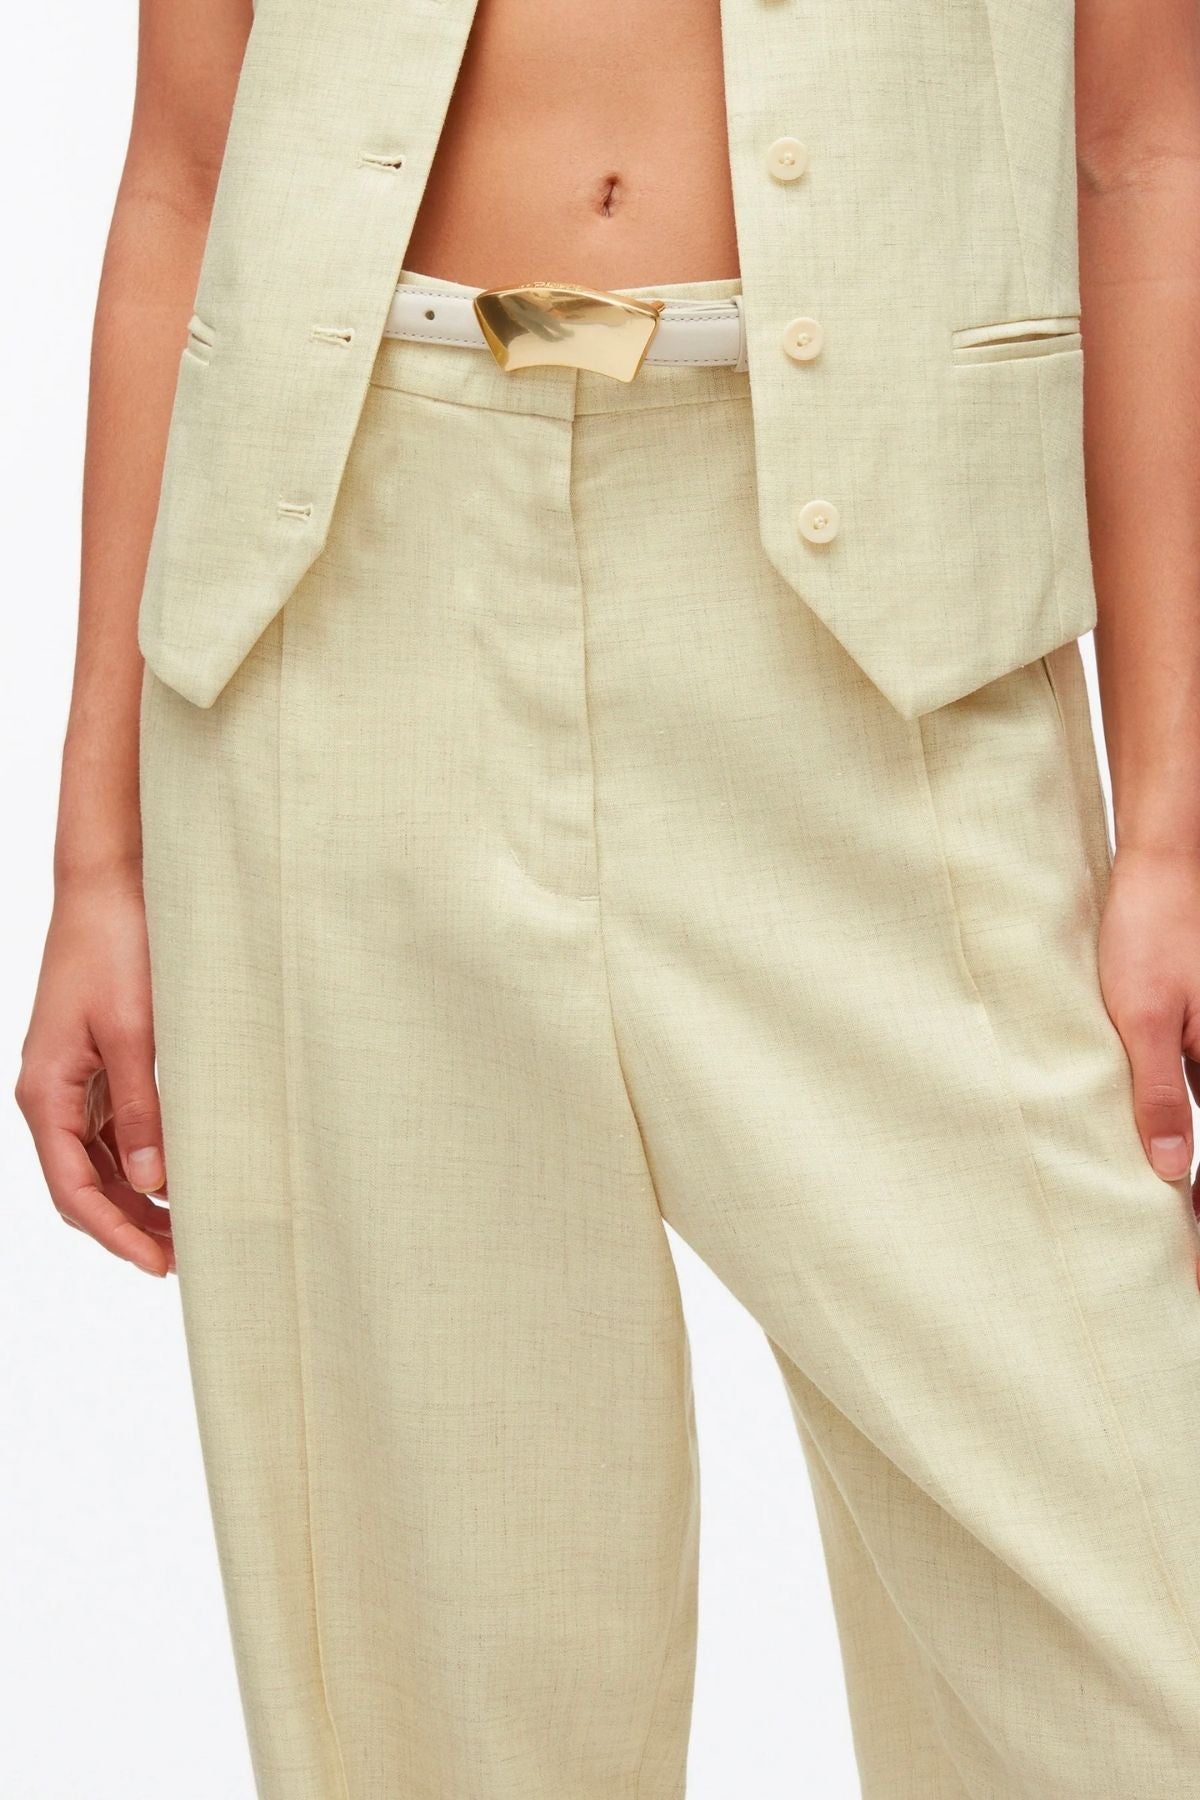 3.1 Phillip Lim Tailored Vest with Set In Bra - Limencello